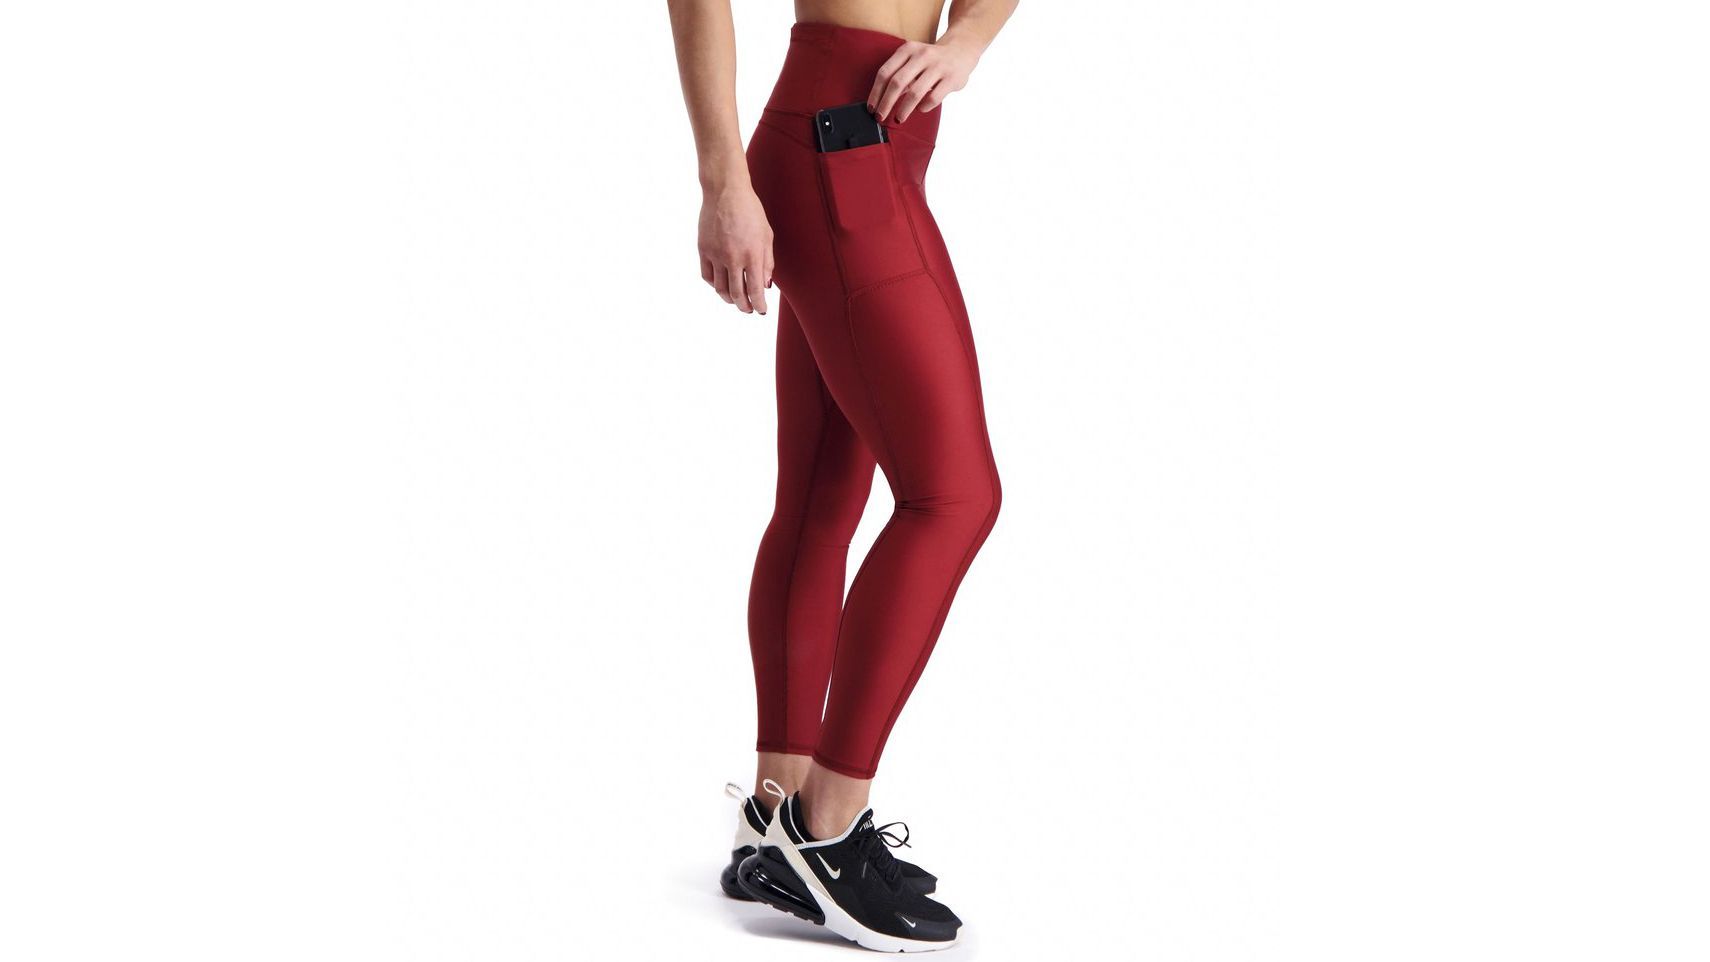 men's workout tights with pockets